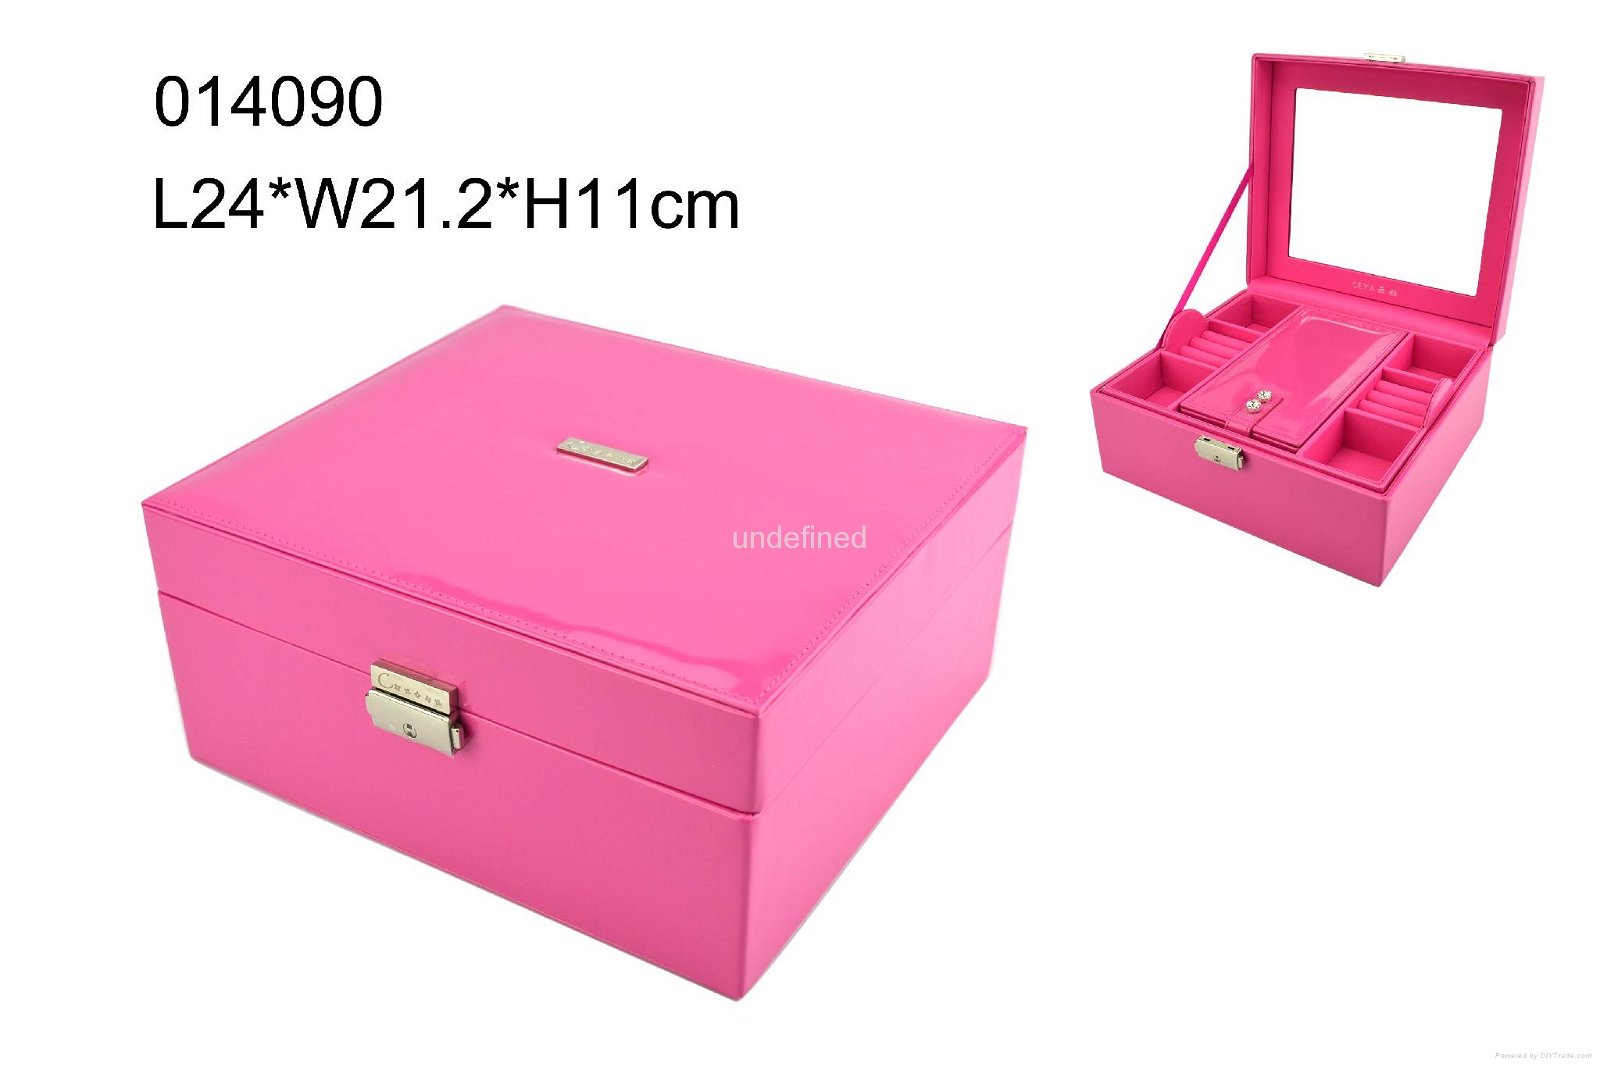 High grade pink PU jewelry box with ring set small pouch inside sold in Shantou